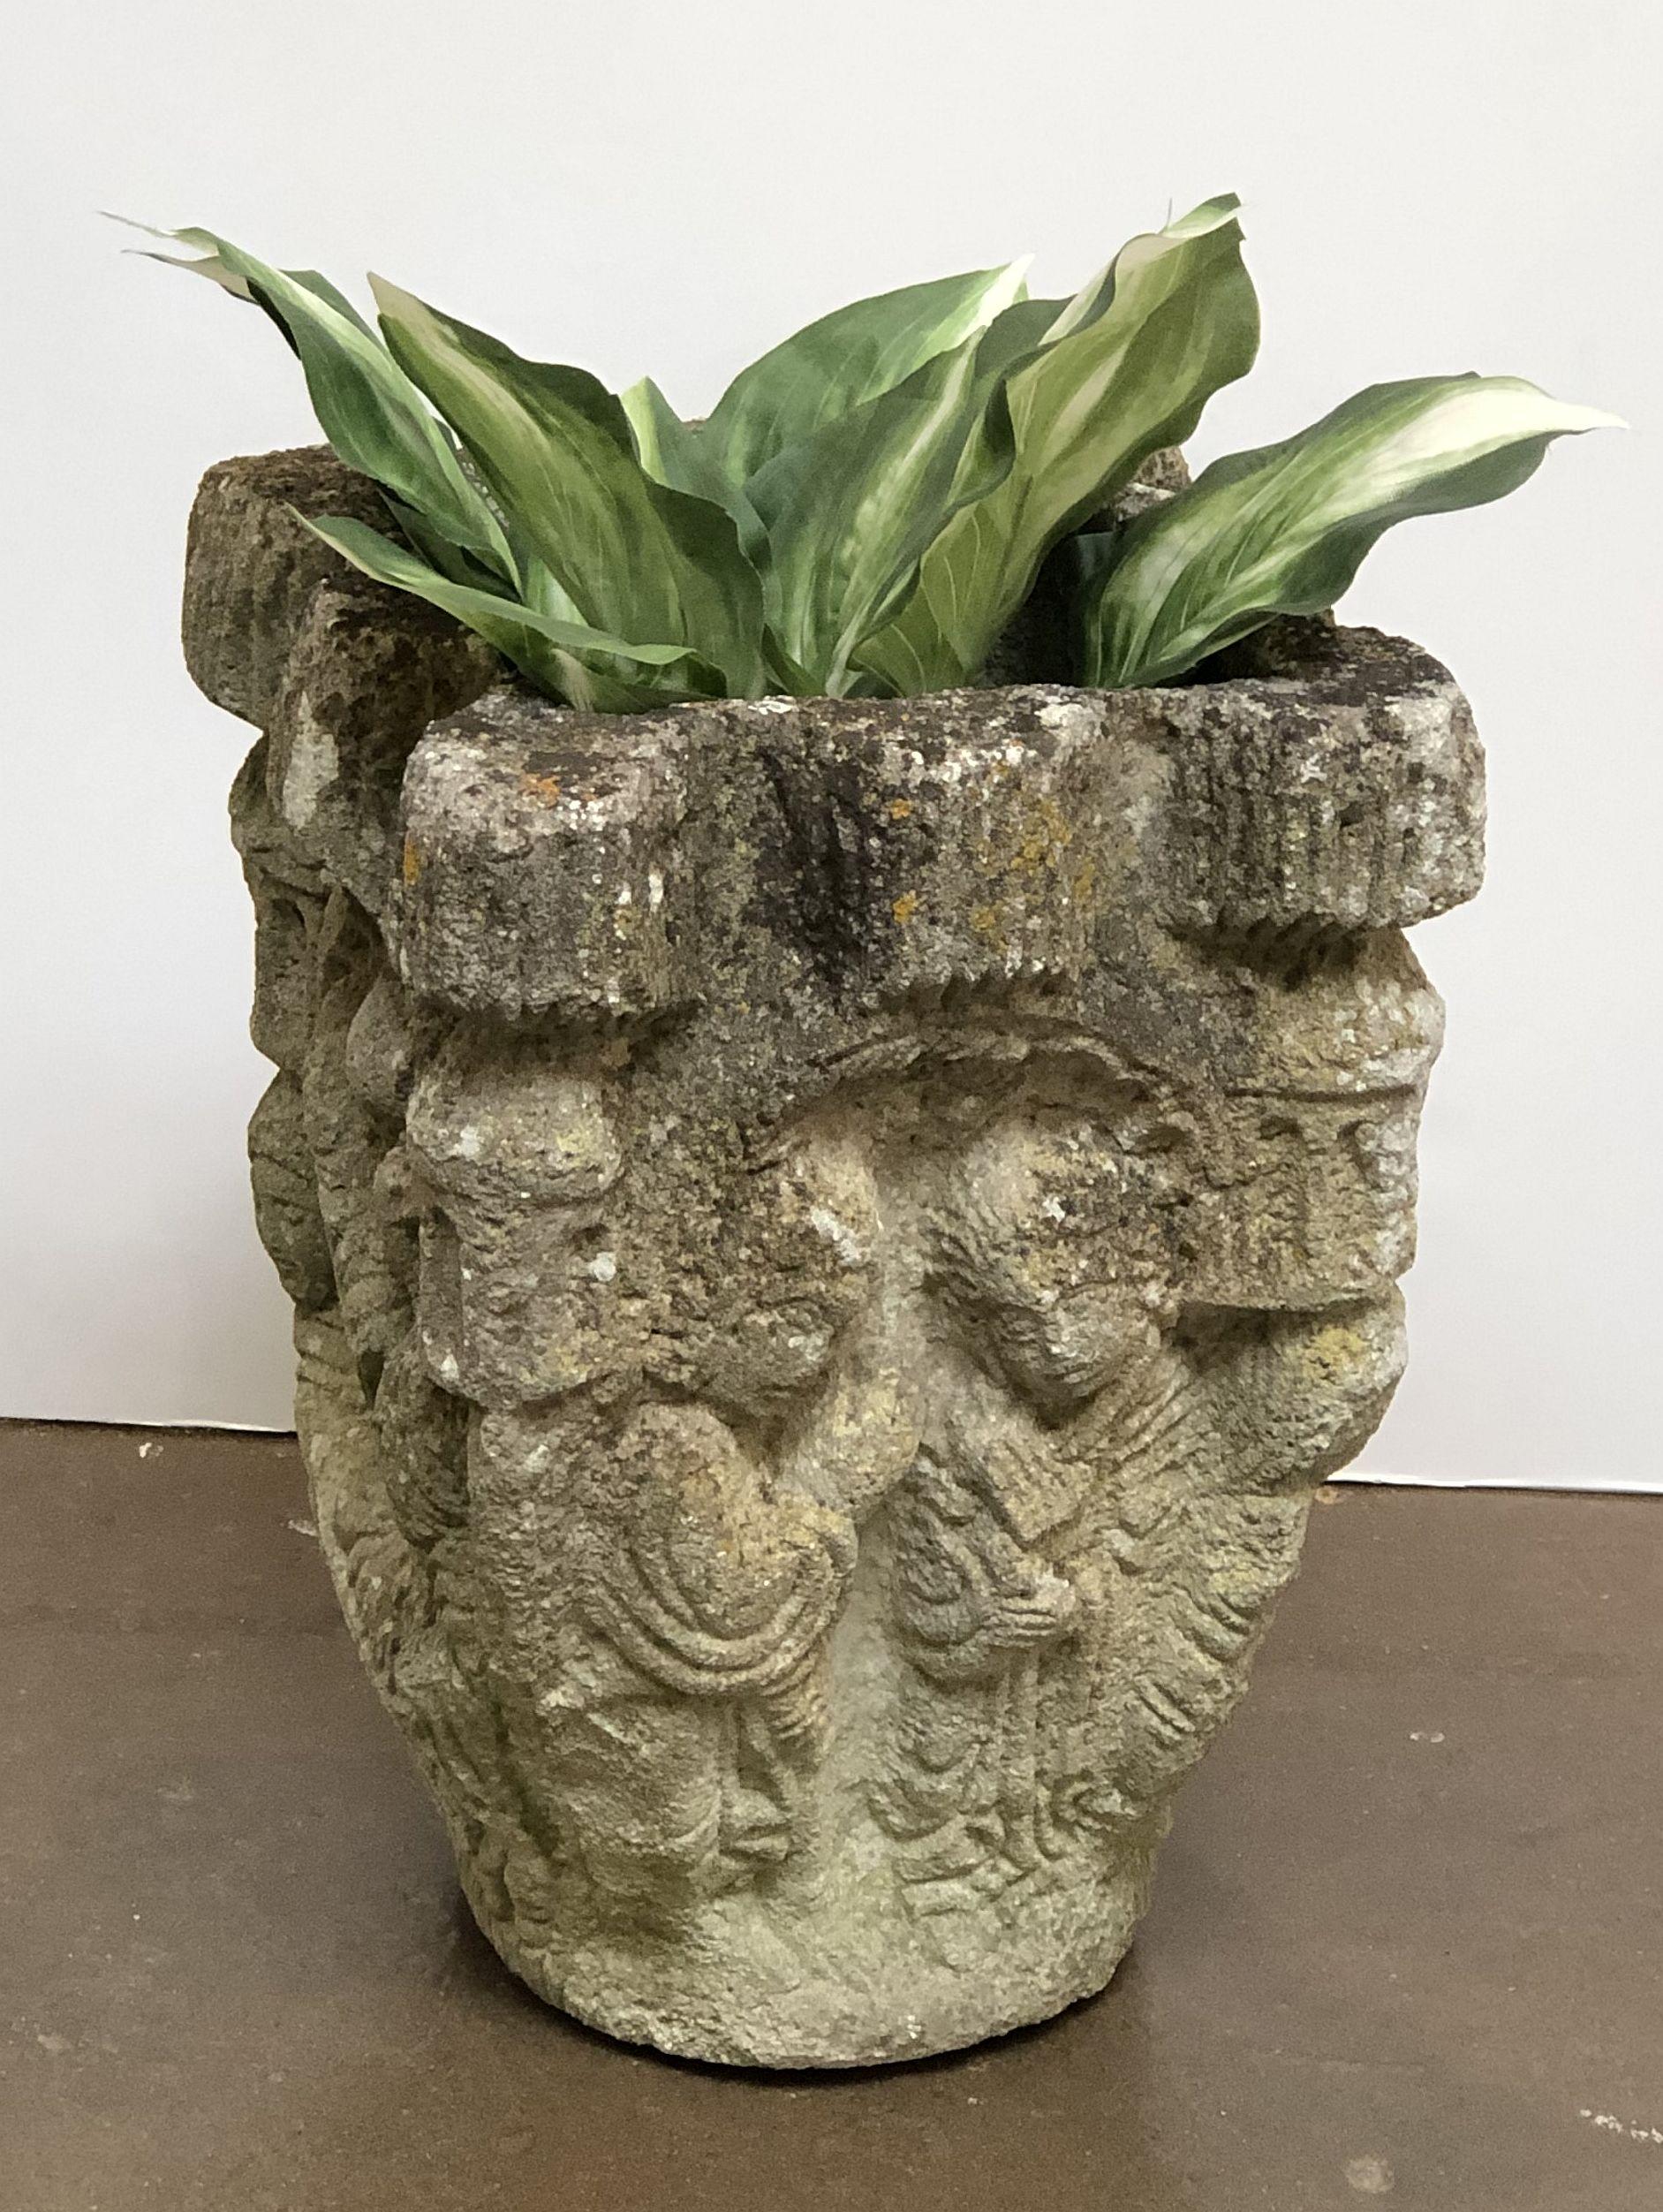 A fine French garden pot or planter urn of composition stone, featuring a weathered exterior relief of figures around the circumference.

A beautiful addition to an indoor or outdoor garden room, garden, or patio.

Dimensions are H 16 1/2 inches